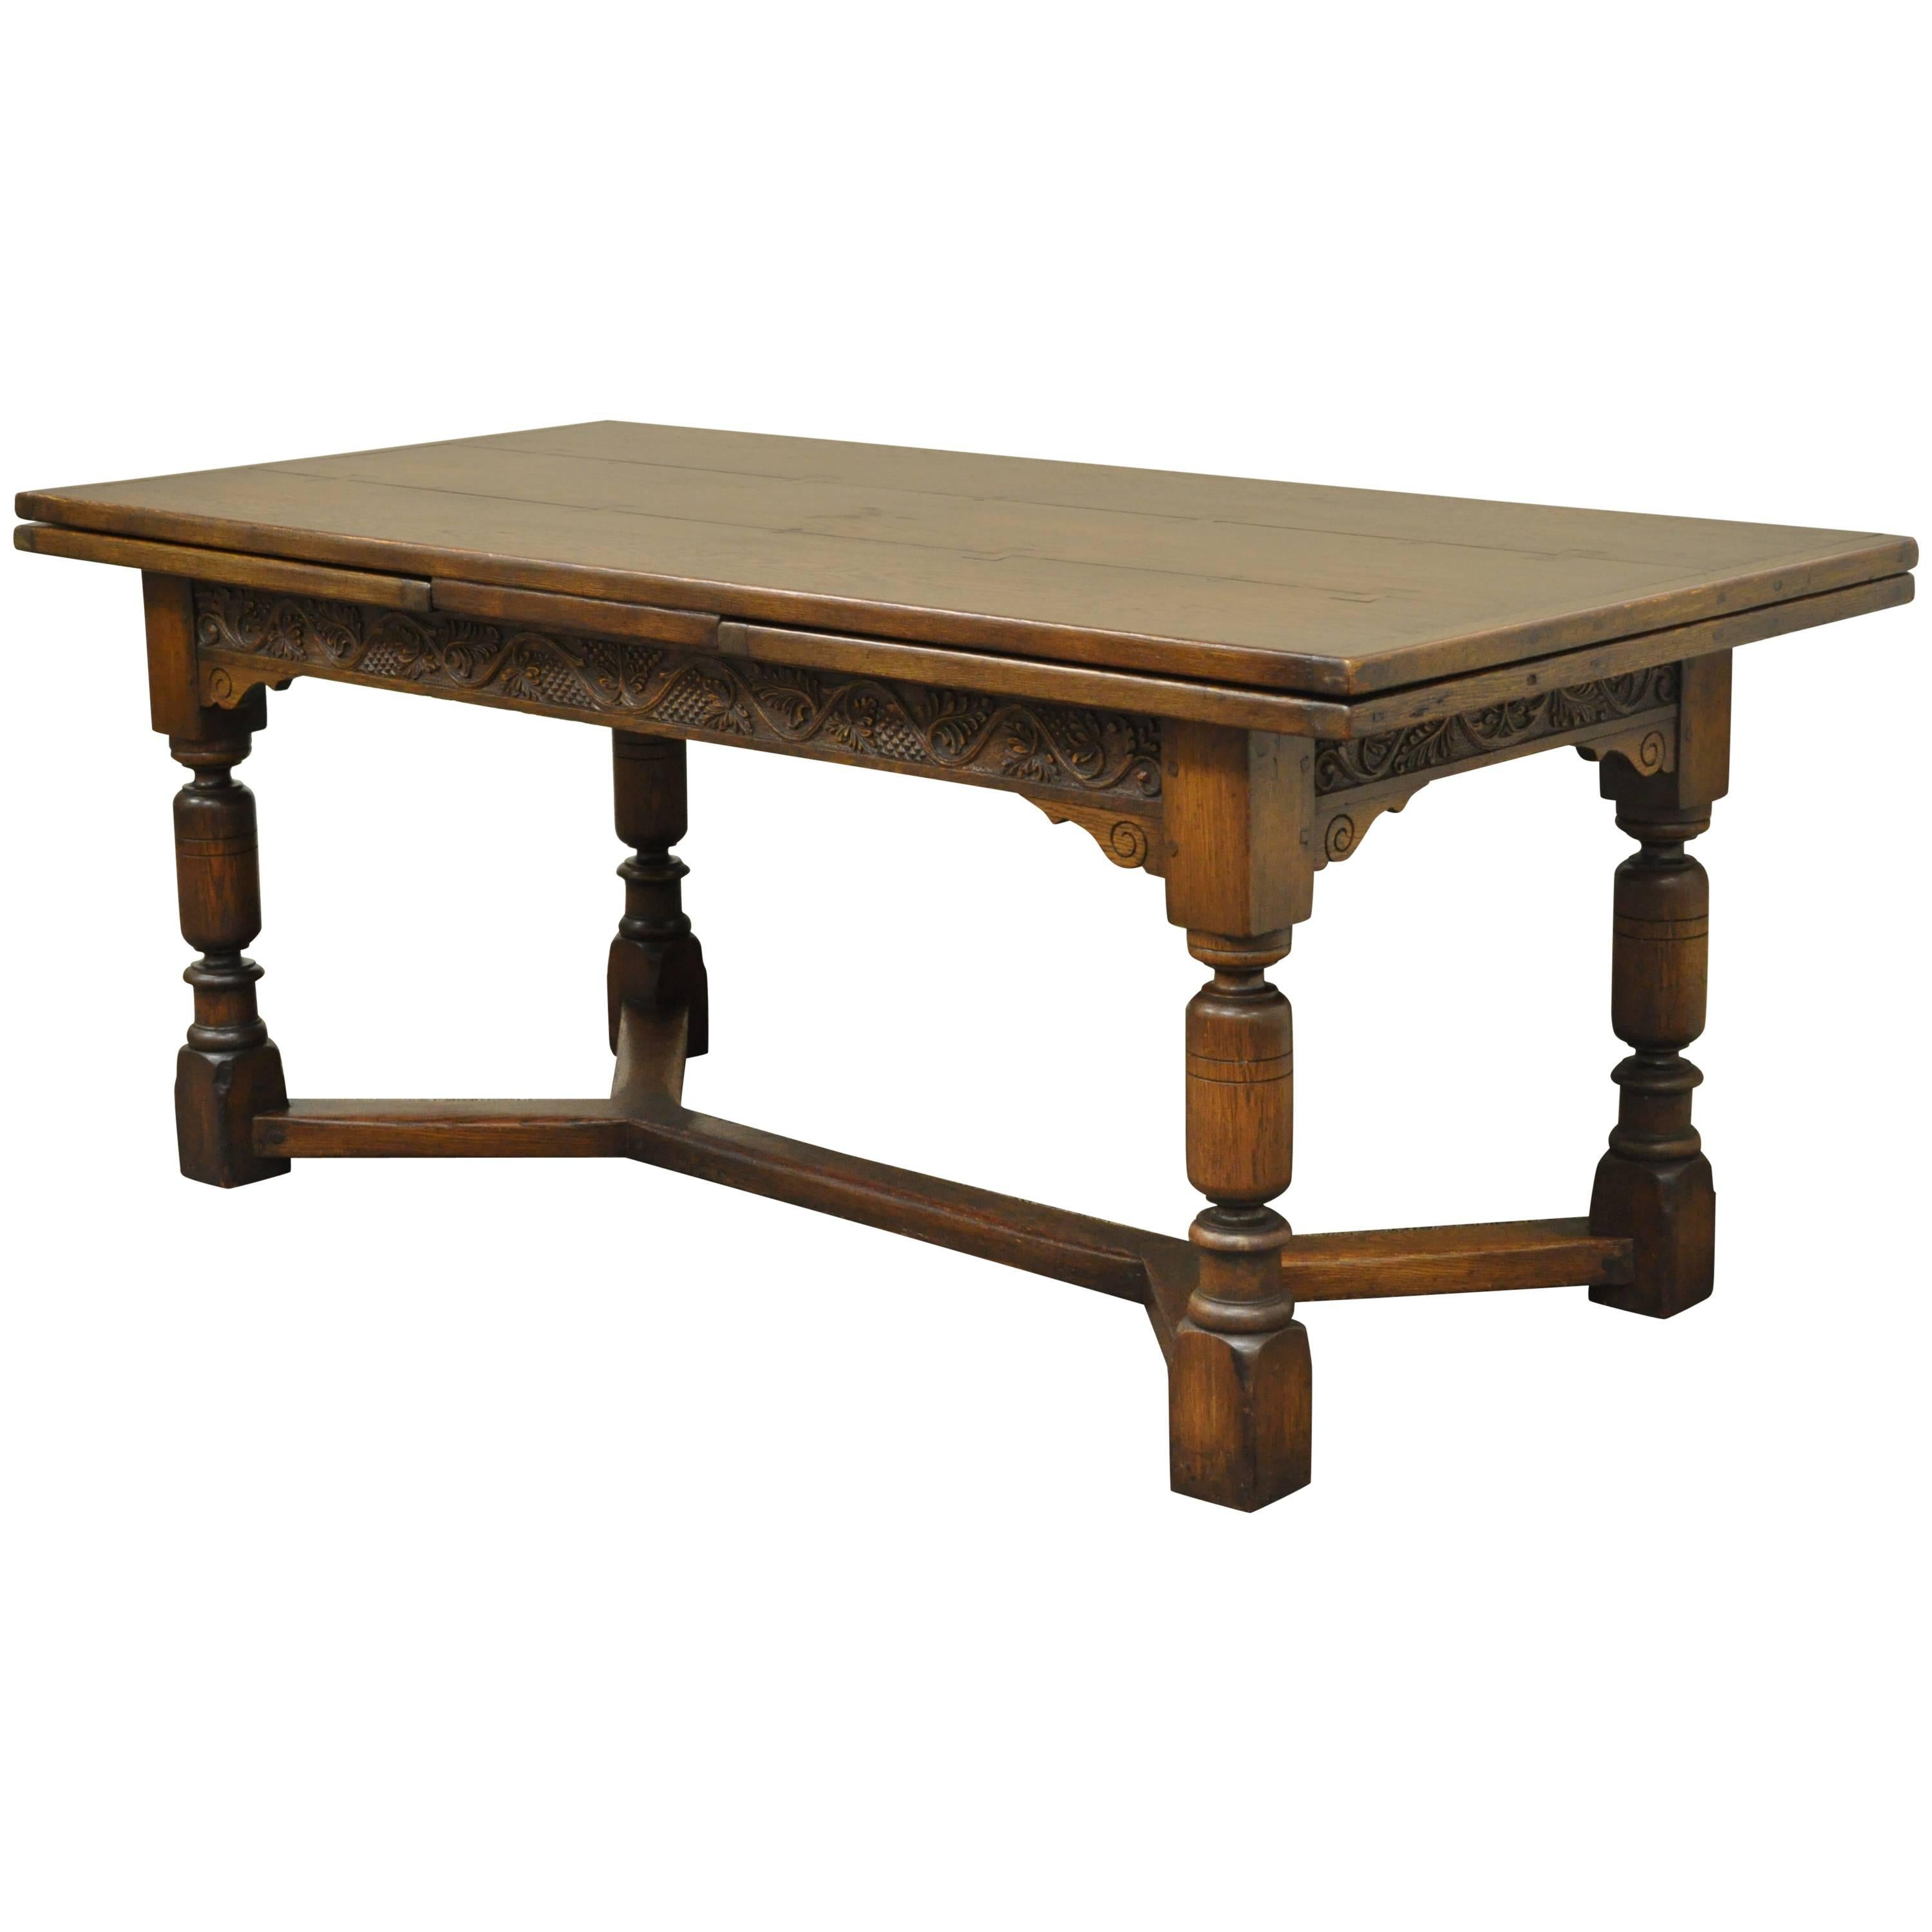 1930s Solid Carved Oak Jacobean Style Refectory Extension Plank Dining Table